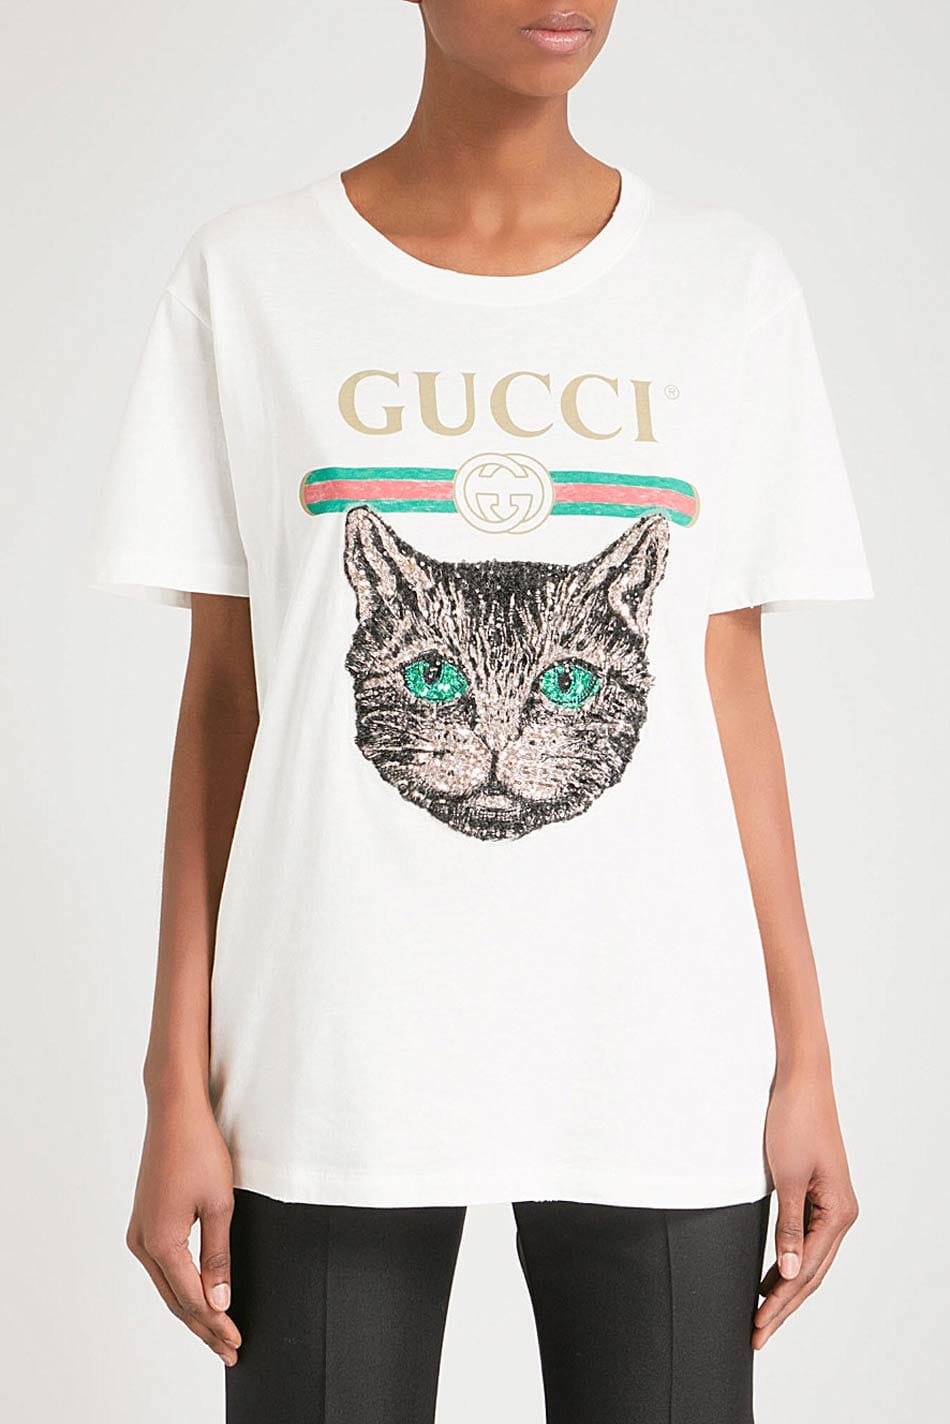 Gucci Releases Embellished Cat Motif T 